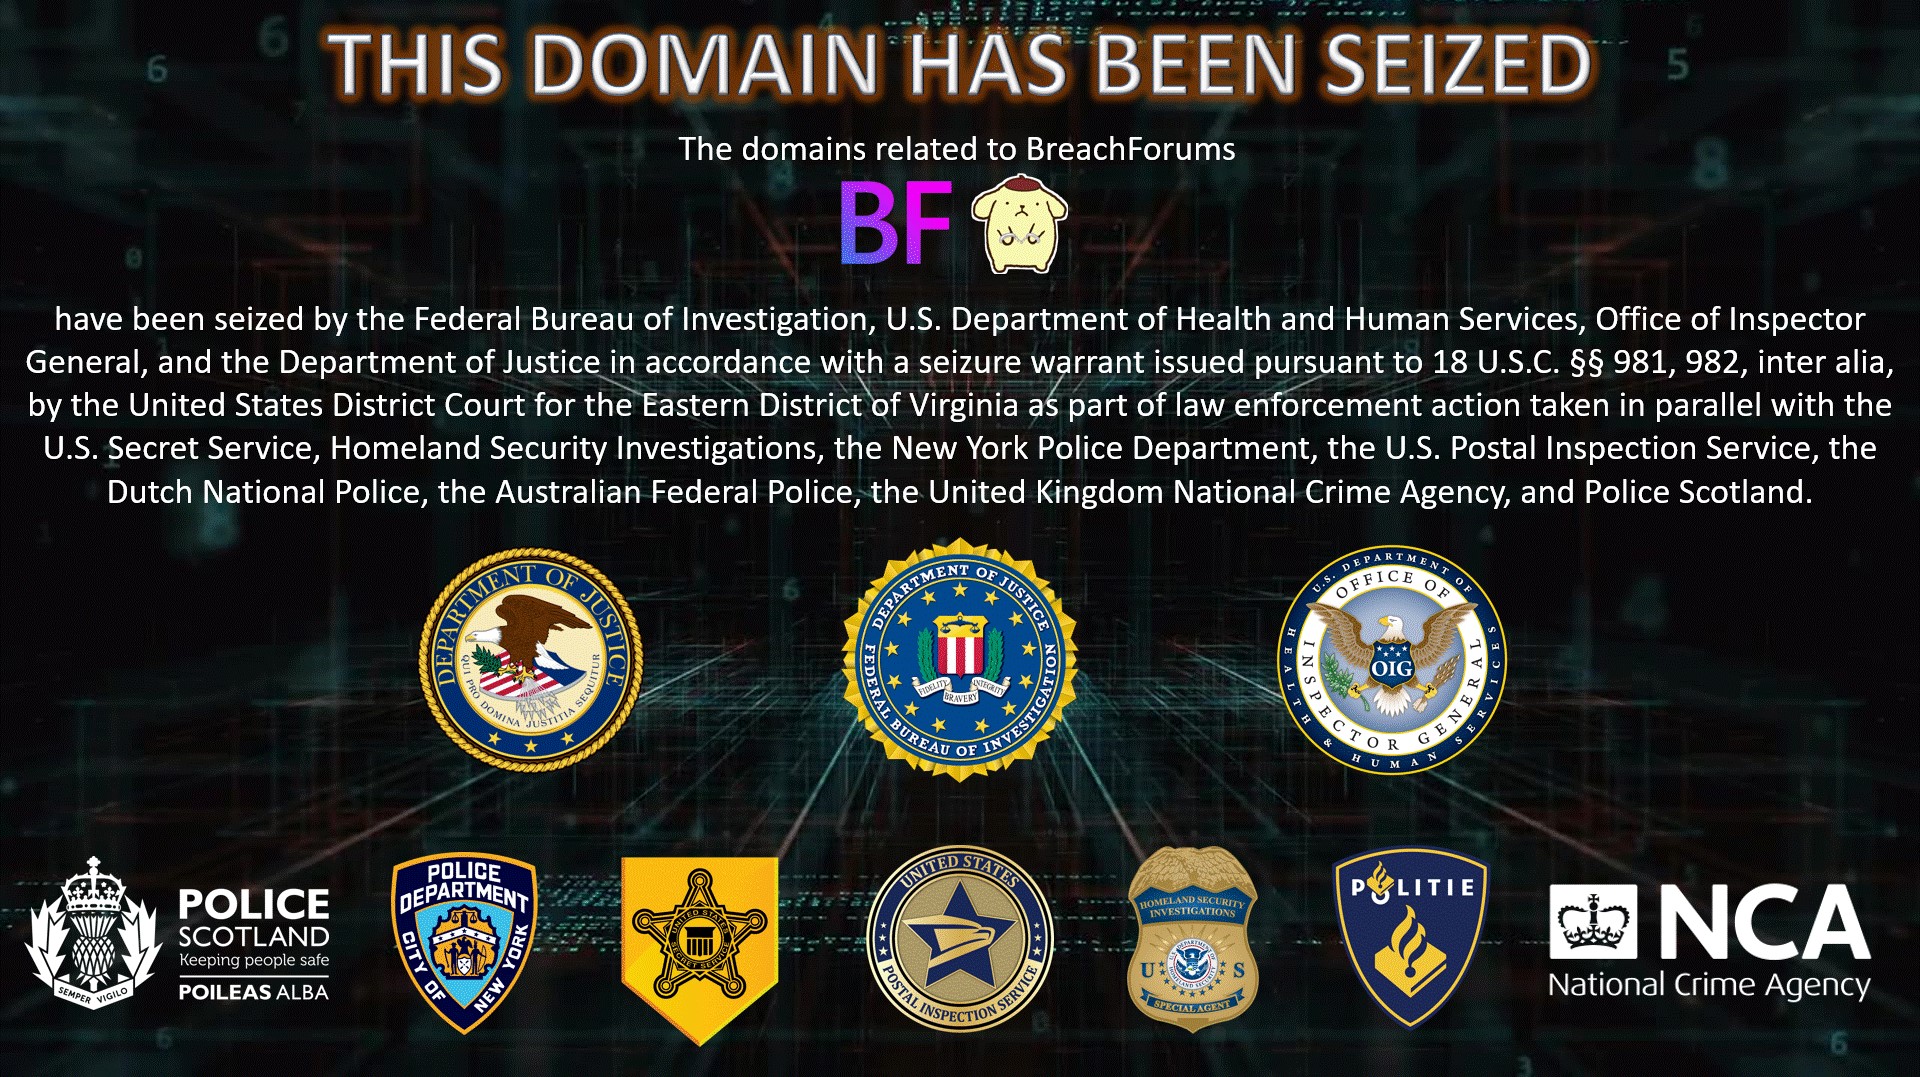 The domains related to BreachForums have been seized by the Federal Bureau of Investigation, U.S. Department of Health and Human Services, Office of Inspector General, and the Department of Justice in accordance with a seizure warrant issued pursuant to 18 U.S.C. §§ 981, 982, inter alia, by the United States District Court for the Eastern District of Virginia as part of law enforcement action taken in parallel with the United States Secret Service, Homeland Security Investigations, the New York Police Department, the U.S. Postal Inspection Service, the Dutch National Police, the Australian Federal Police, the United Kingdom National Crime Agency, and Police Scotland.